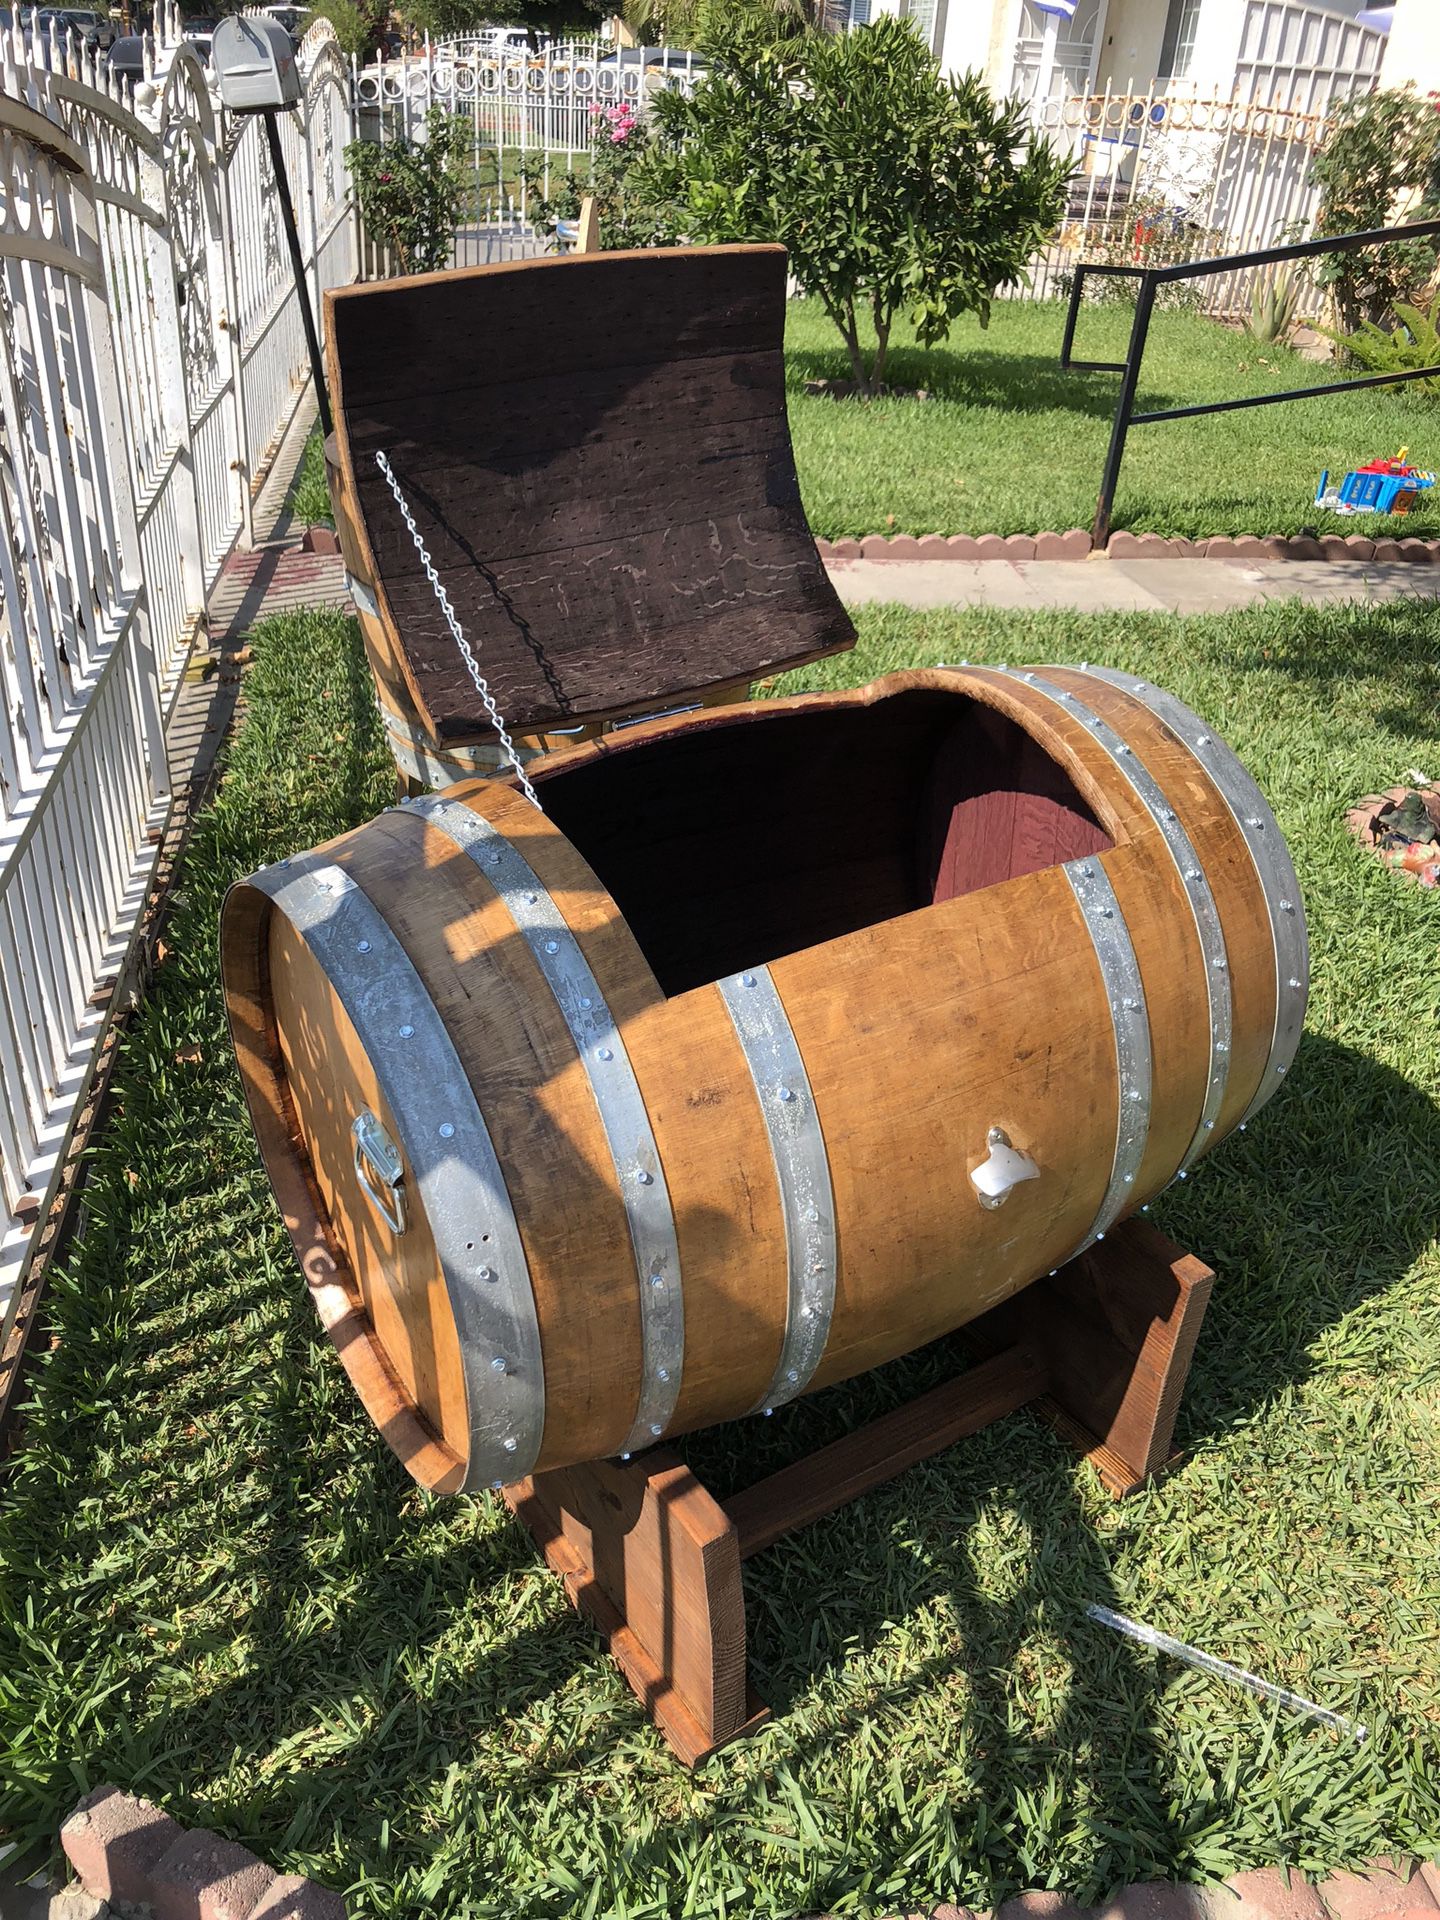 Original wine barrel ice cooler.59 gallons no liquid for sale $$230 free delivery local